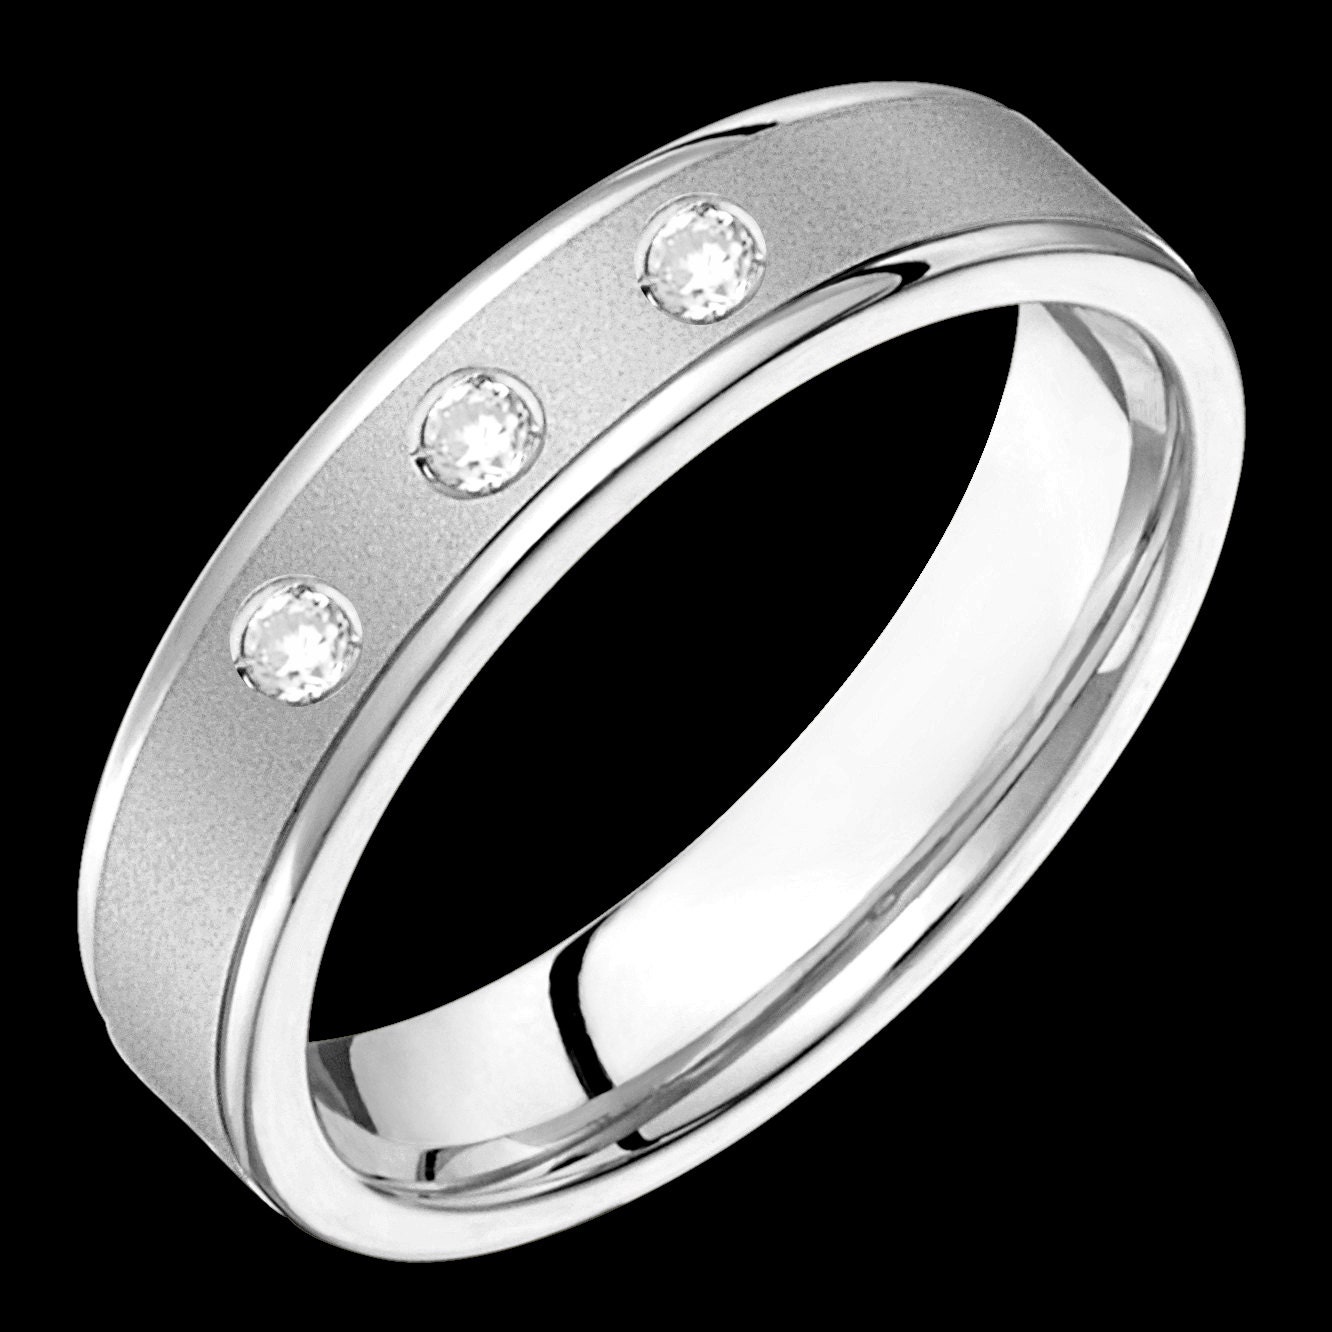 Ladies 10K White Gold Wedding Band Plain Domed Comfort Fit 5mm Wide Ring Sz 5-10 